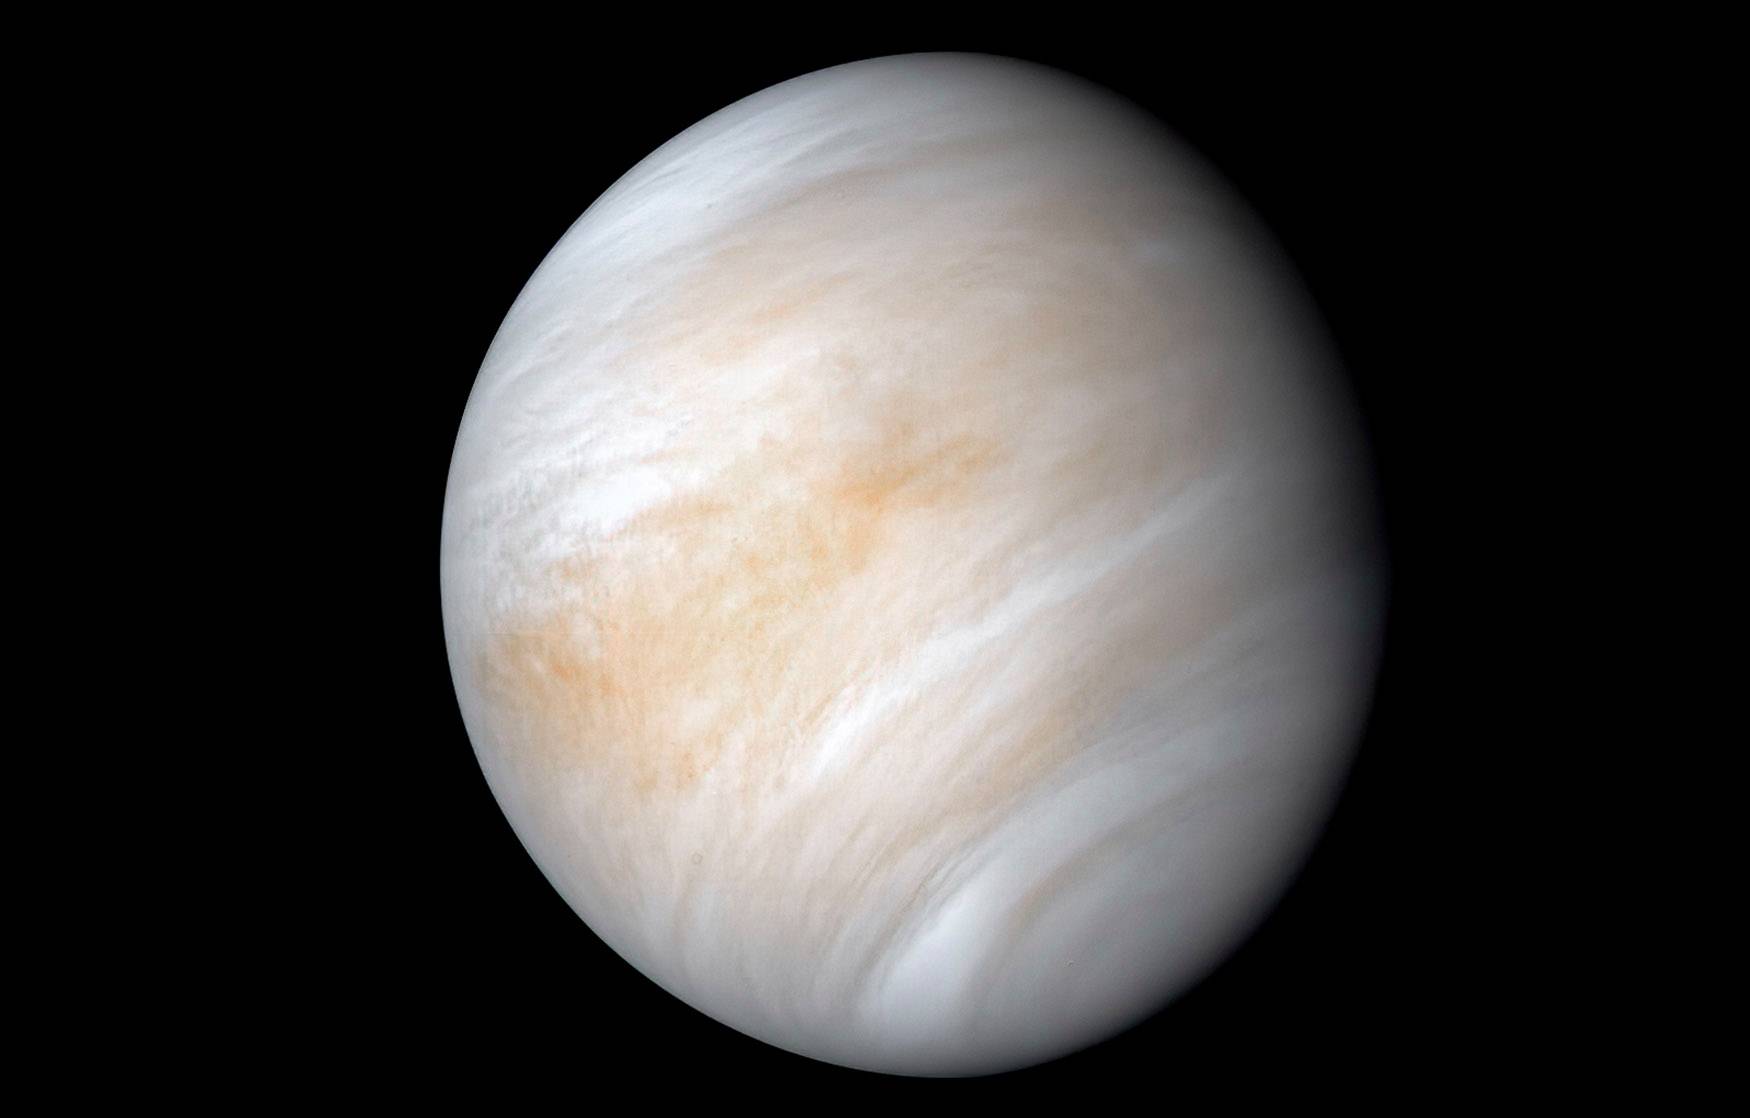 Theory of life on Venus simply got fully destroyed